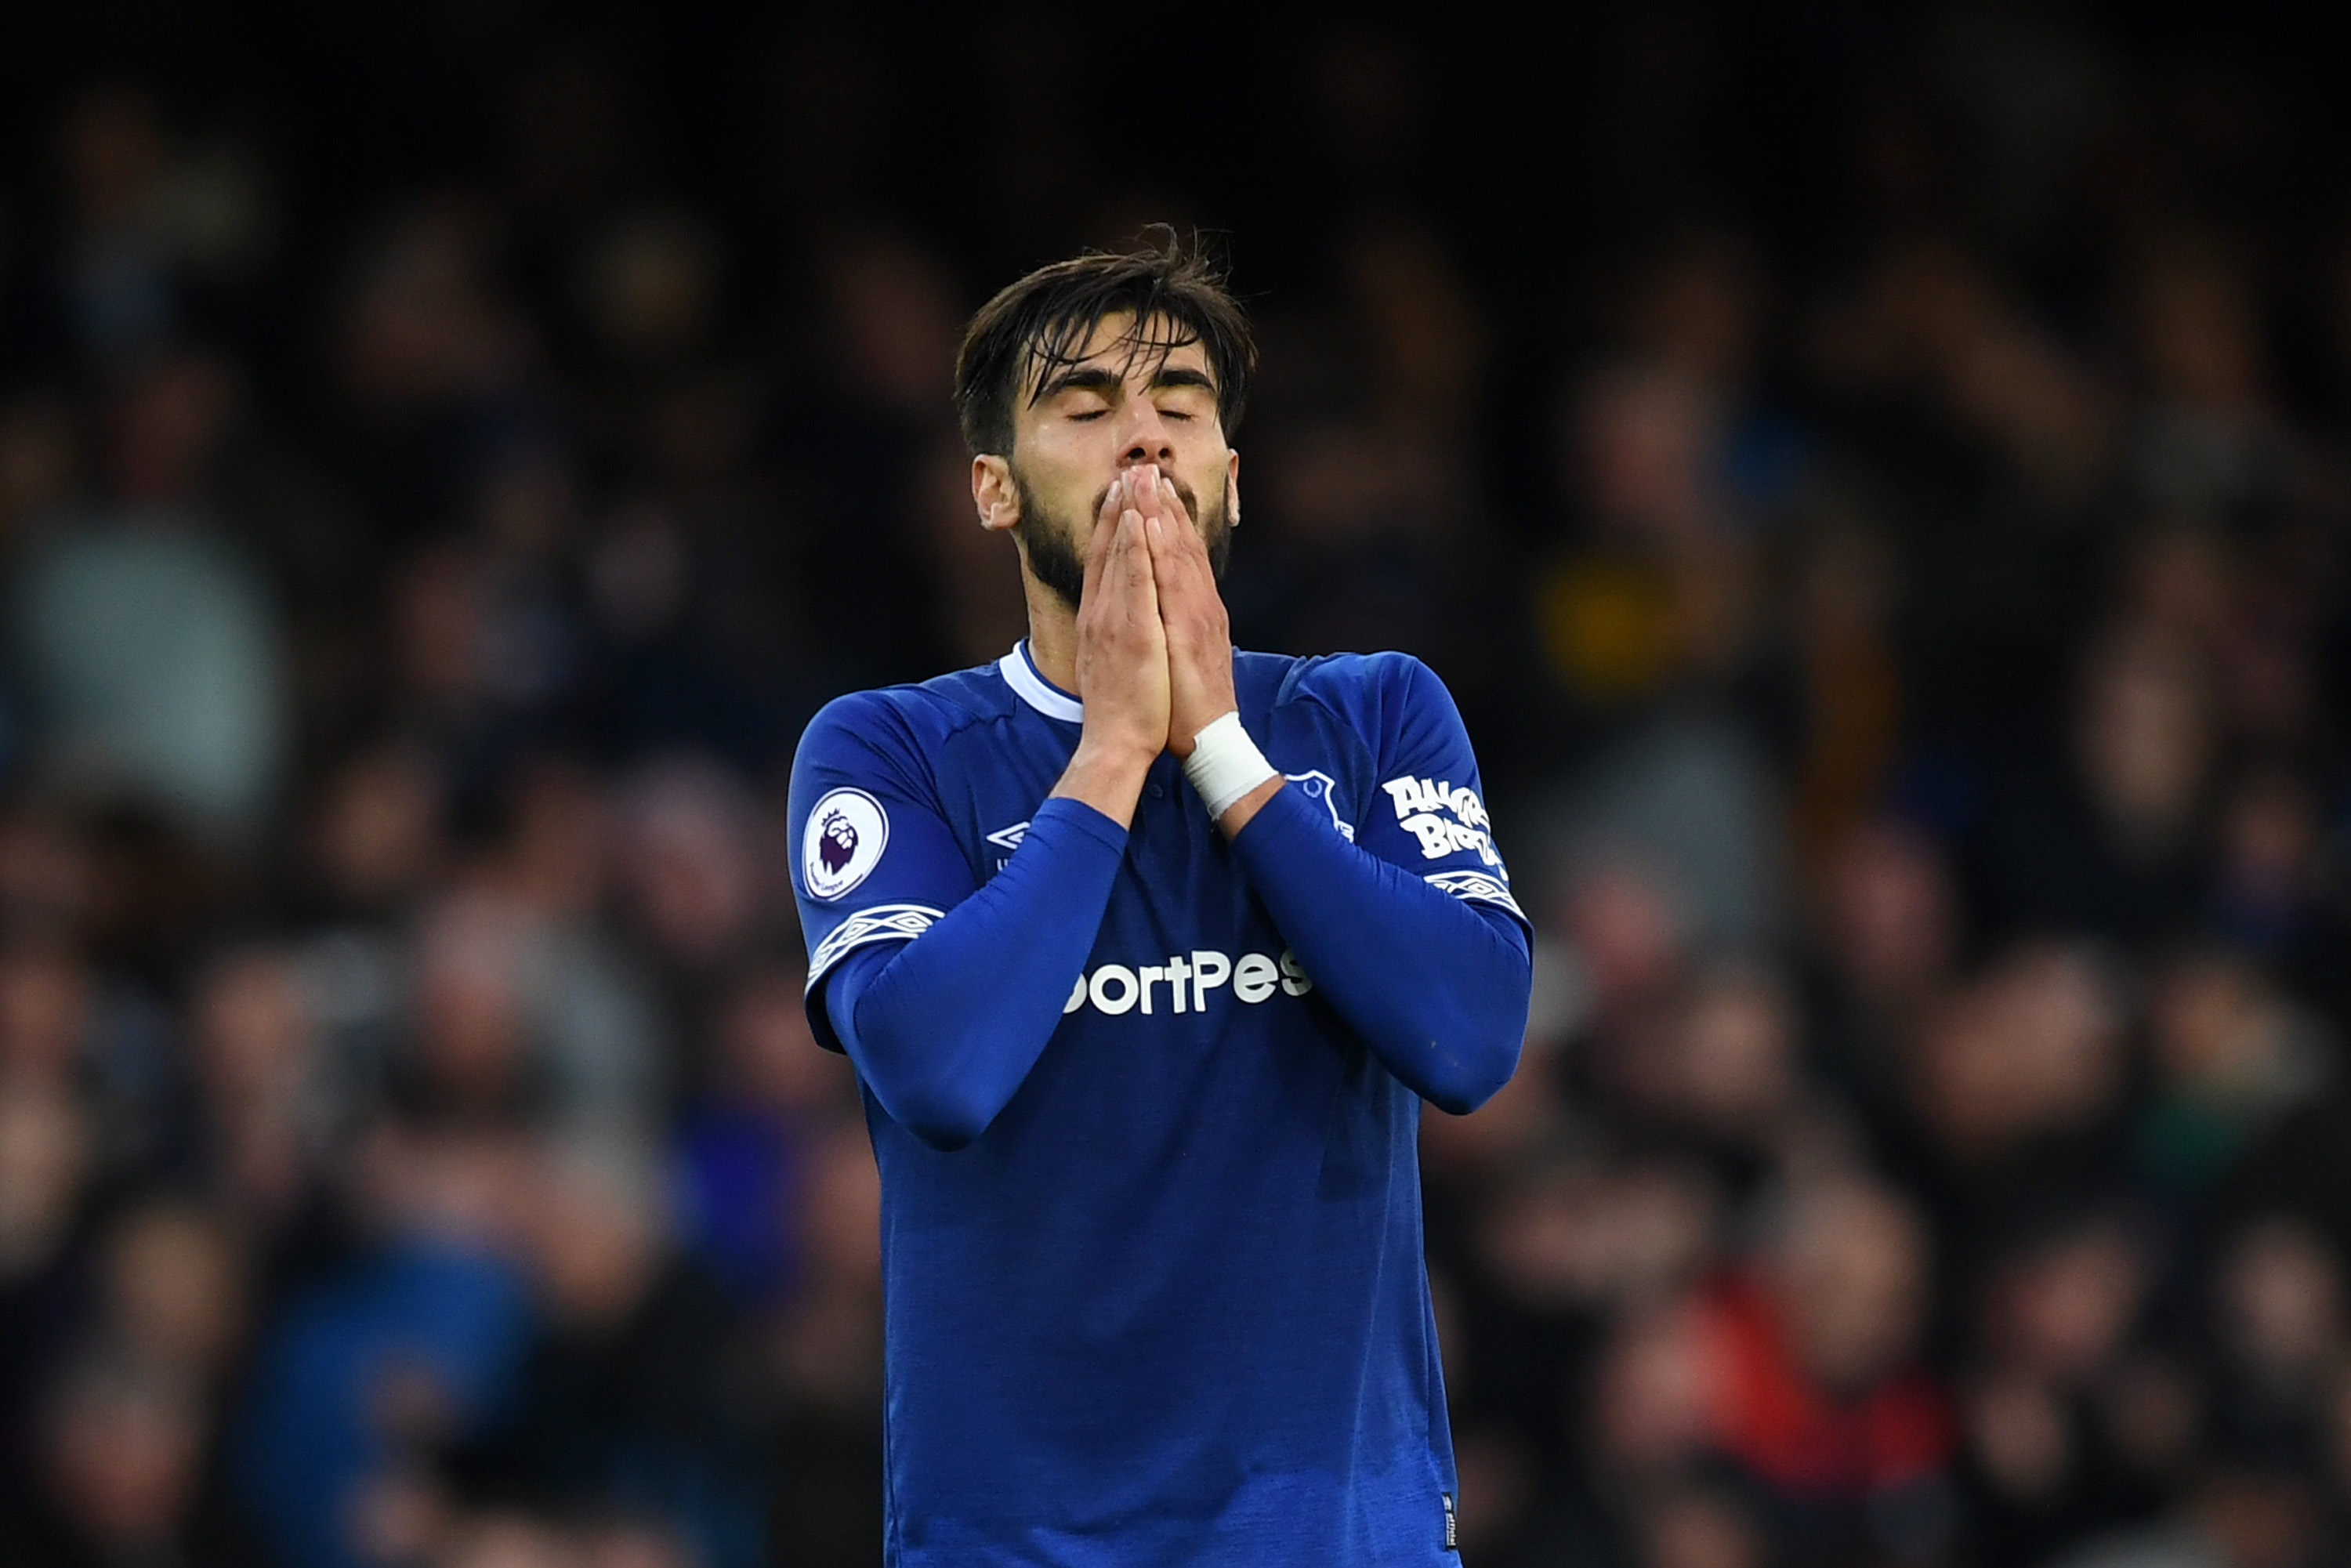 LIVERPOOL, ENGLAND - OCTOBER 21:  André Gomes of Everton reacts during the Premier League match between Everton FC and Crystal Palace at Goodison Park on October 21, 2018 in Liverpool, United Kingdom.  (Photo by Michael Regan/Getty Images)